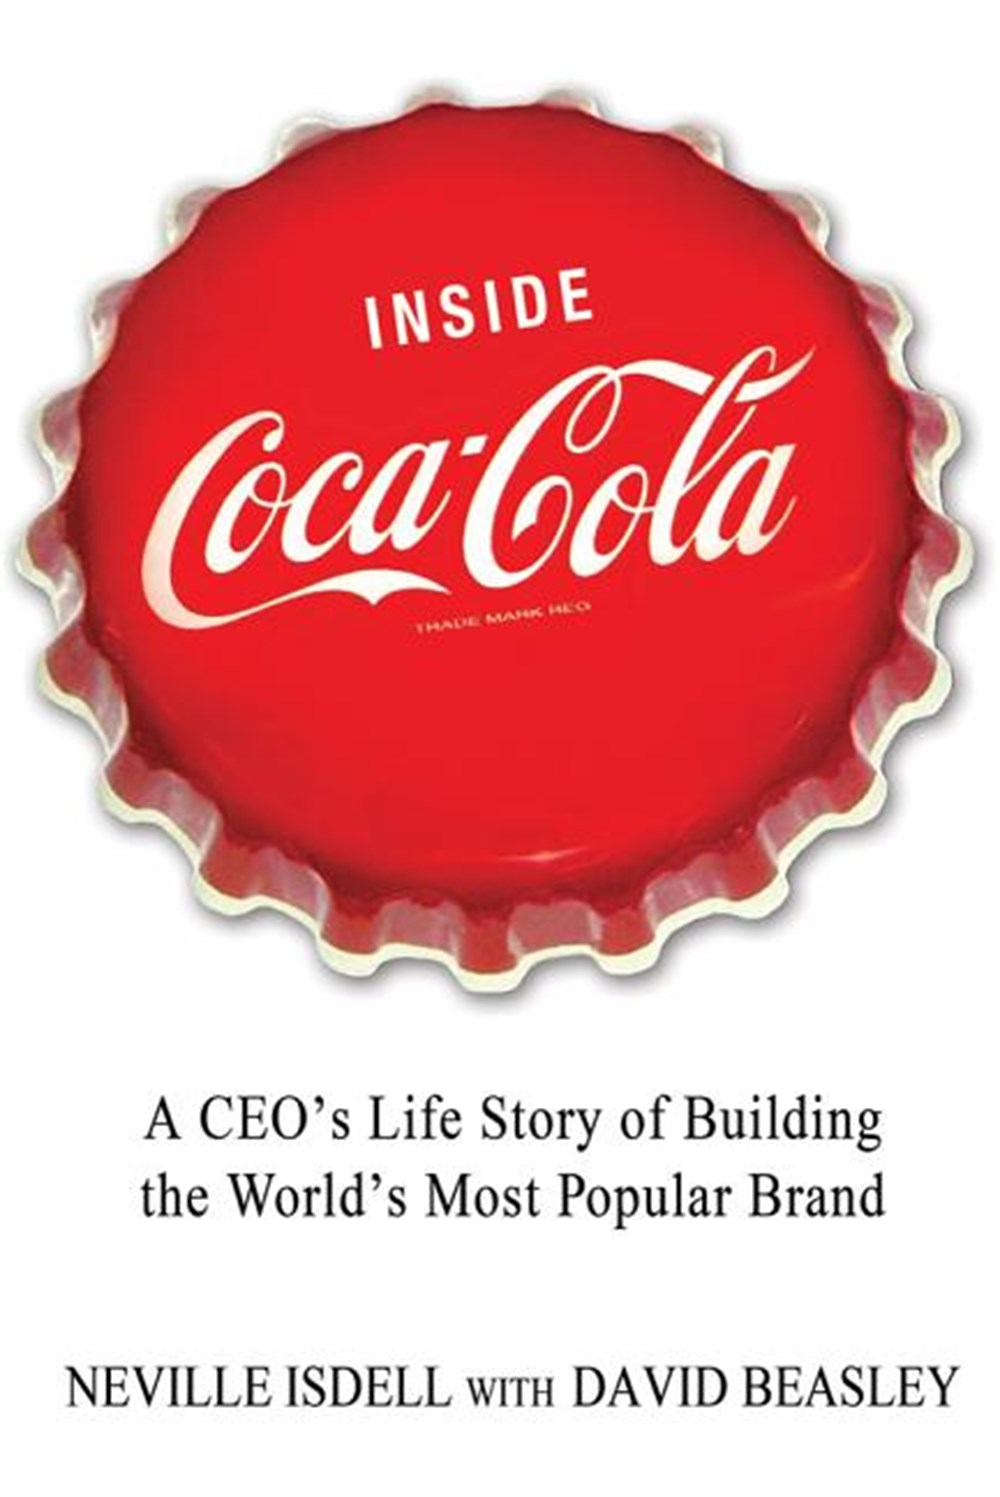 Inside Coca-Cola: A Ceo's Life Story of Building the World's Most Popular Brand